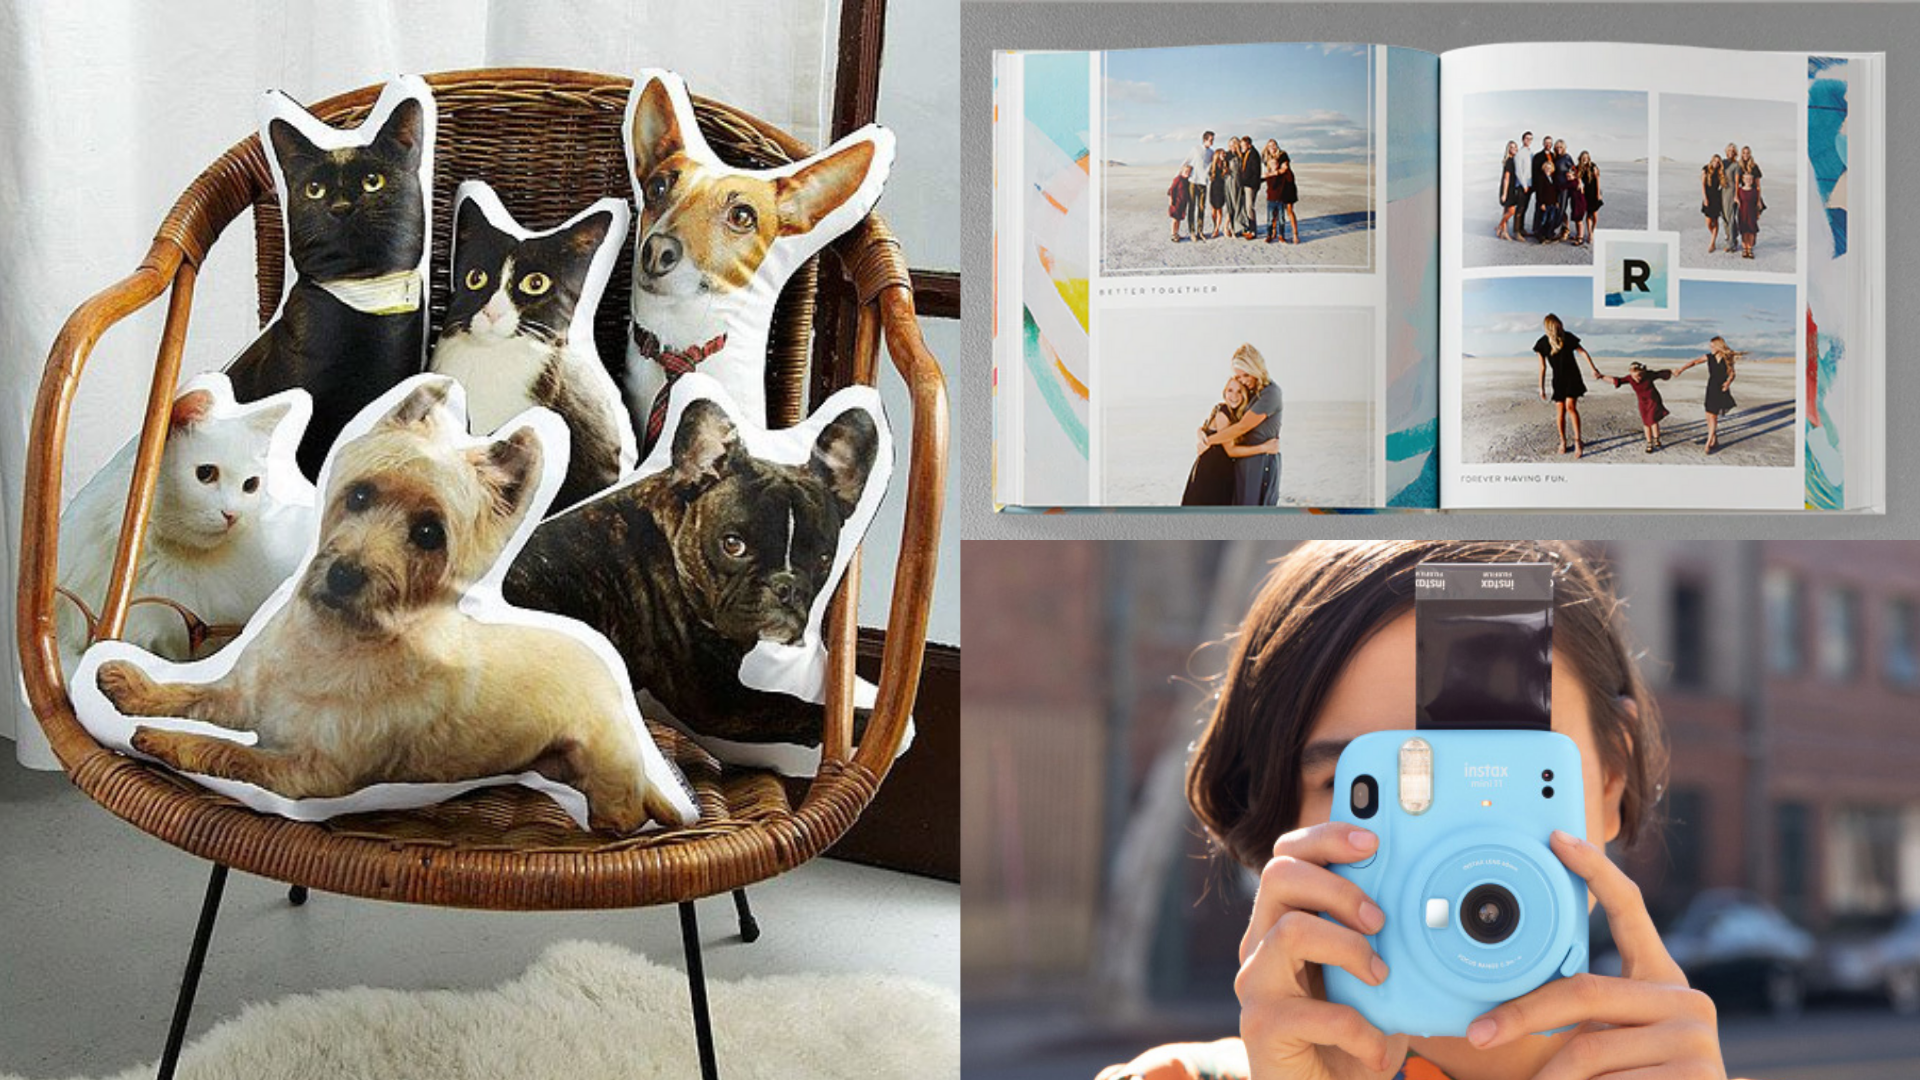 The 25 best custom photo gifts anyone will love